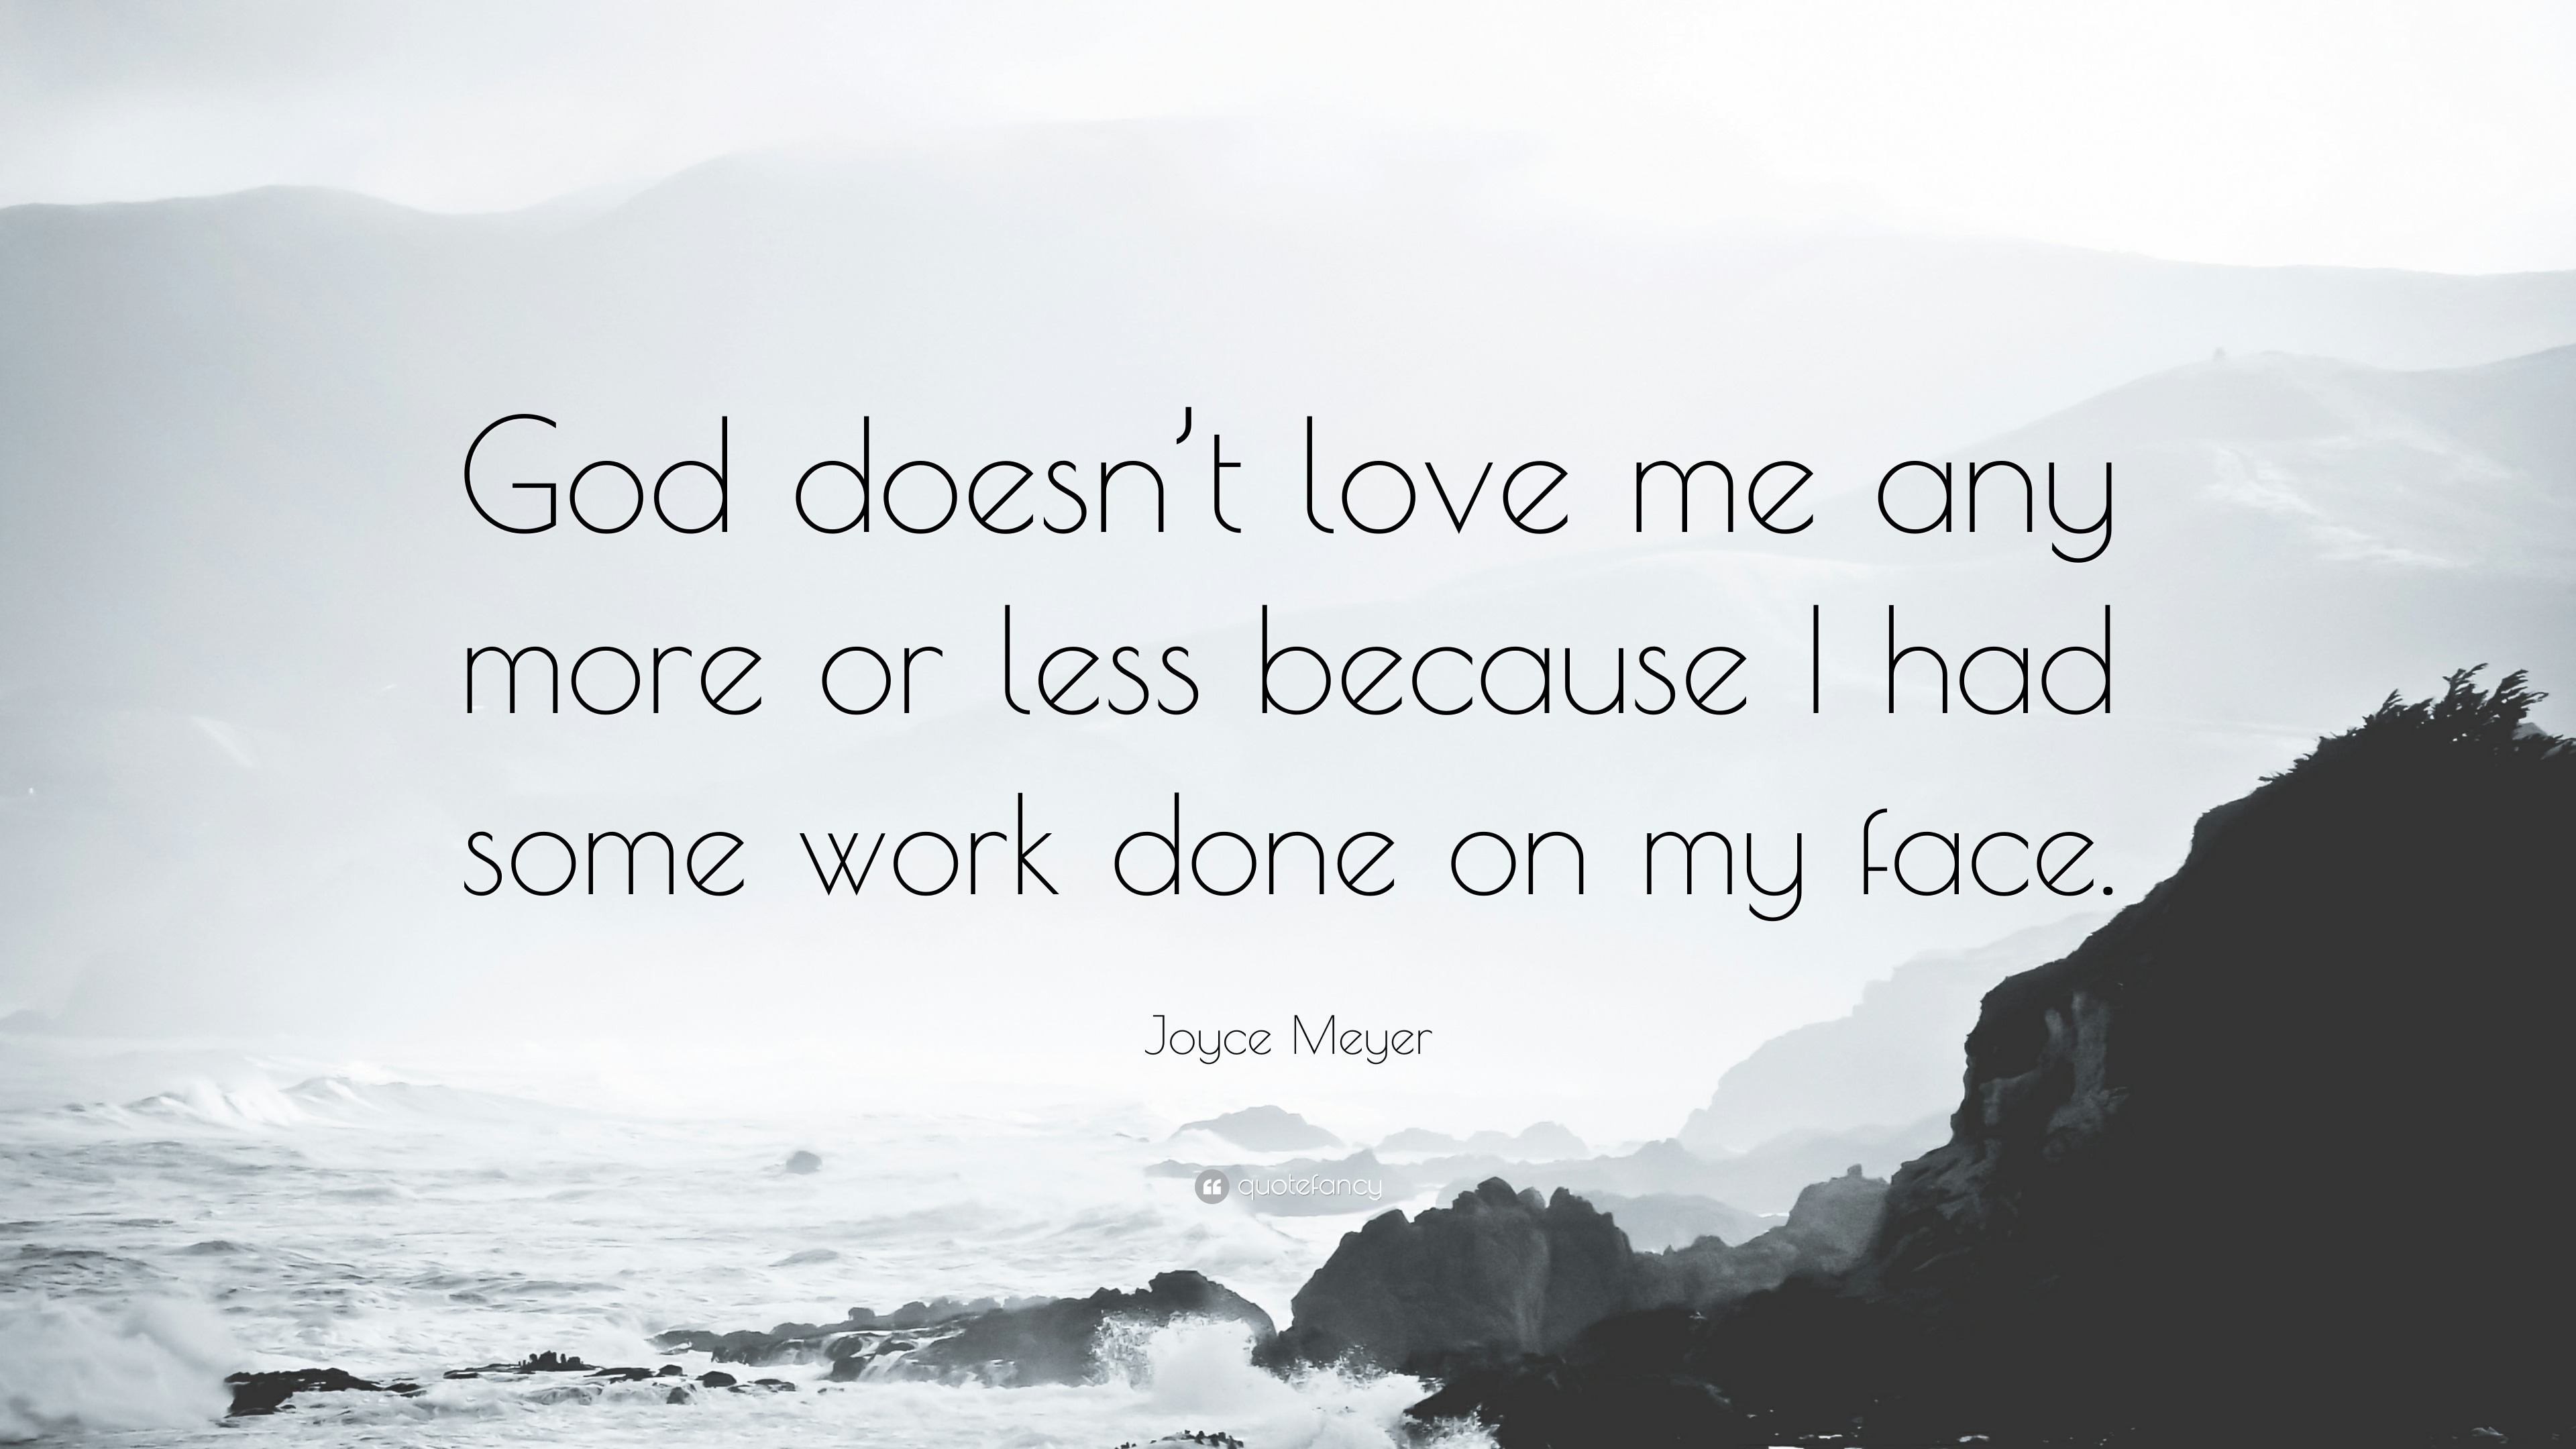 Joyce Meyer Quote “God doesn t love me any more or less because